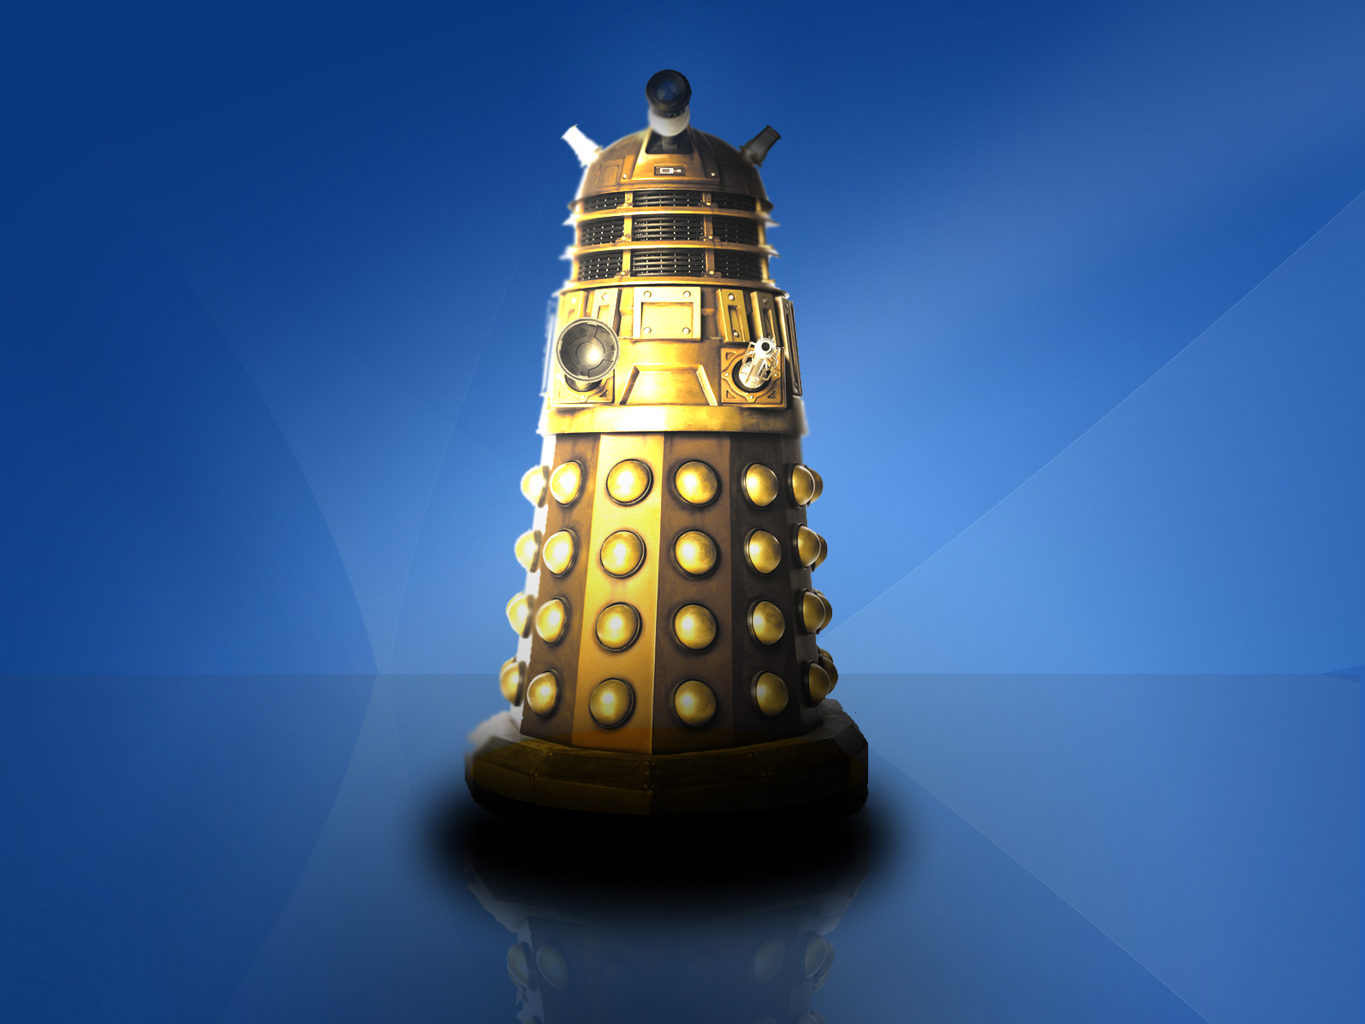 Why the Daleks? – “The Daleks are awesome, no matter what anyone says.” –  Sacred Icon